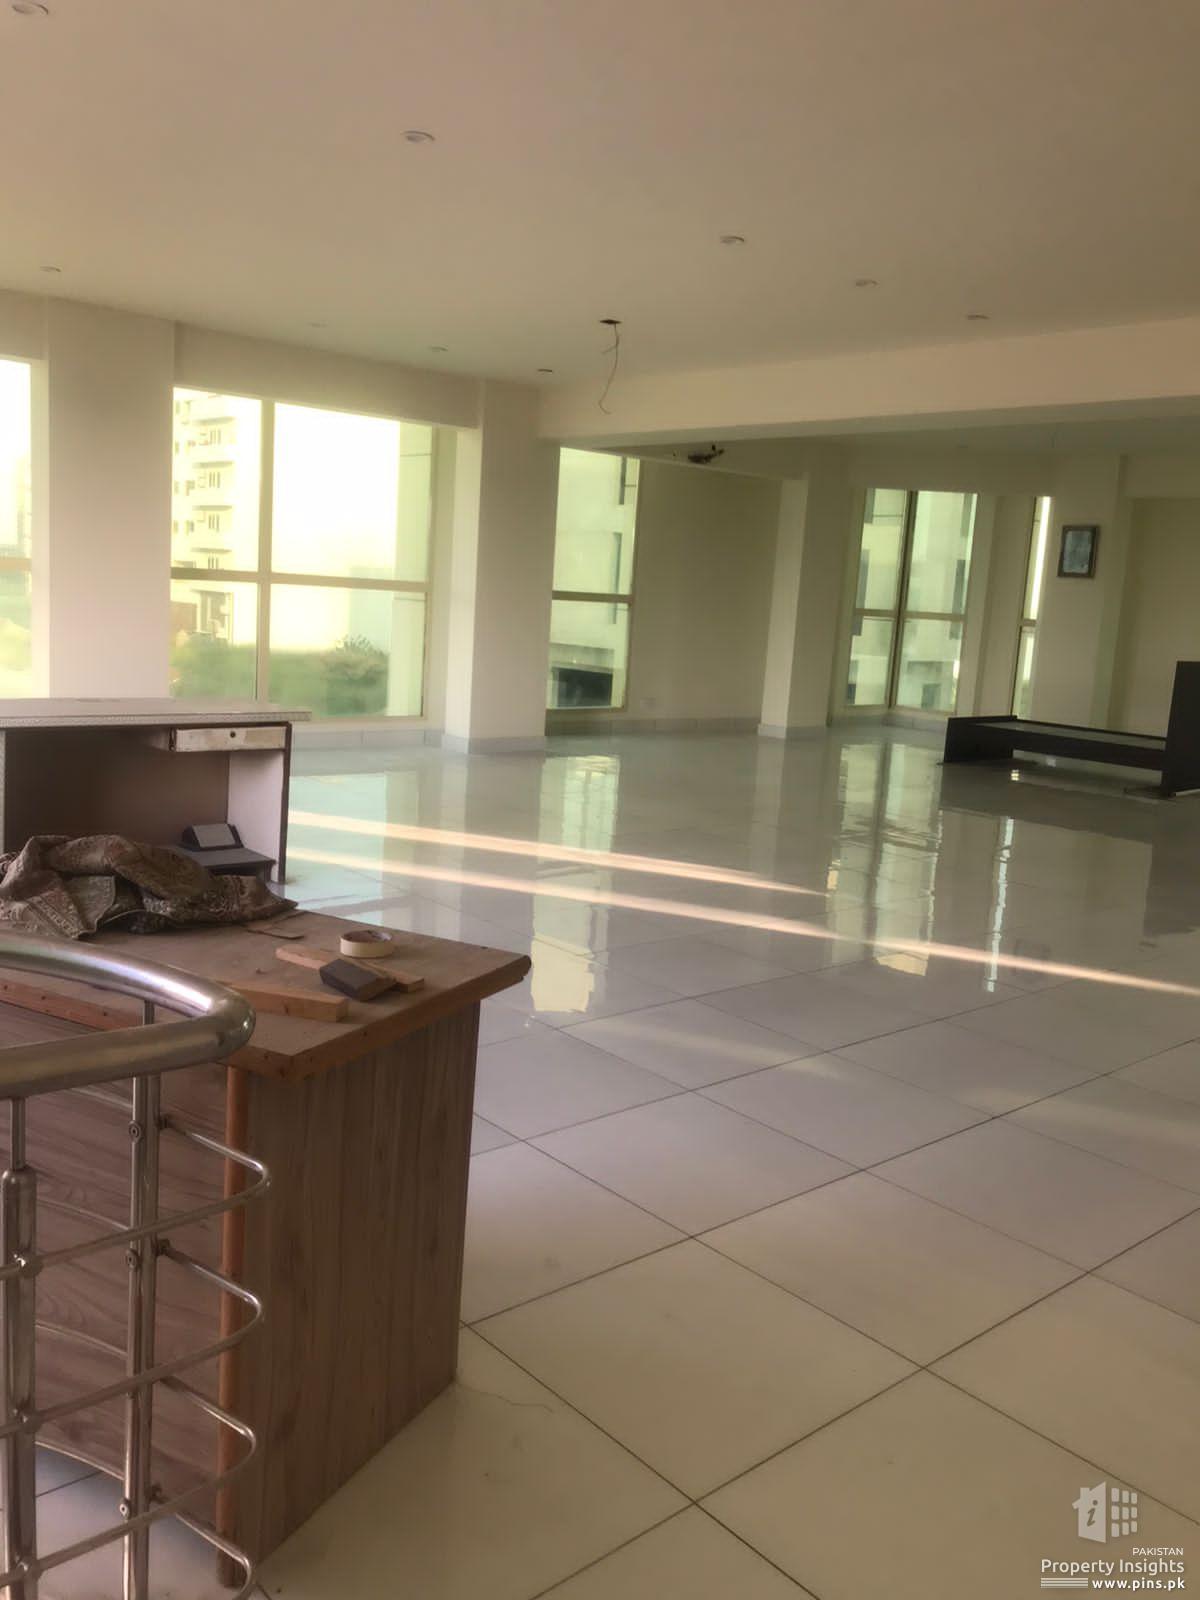 17000 sq ft office for rent in Clifton